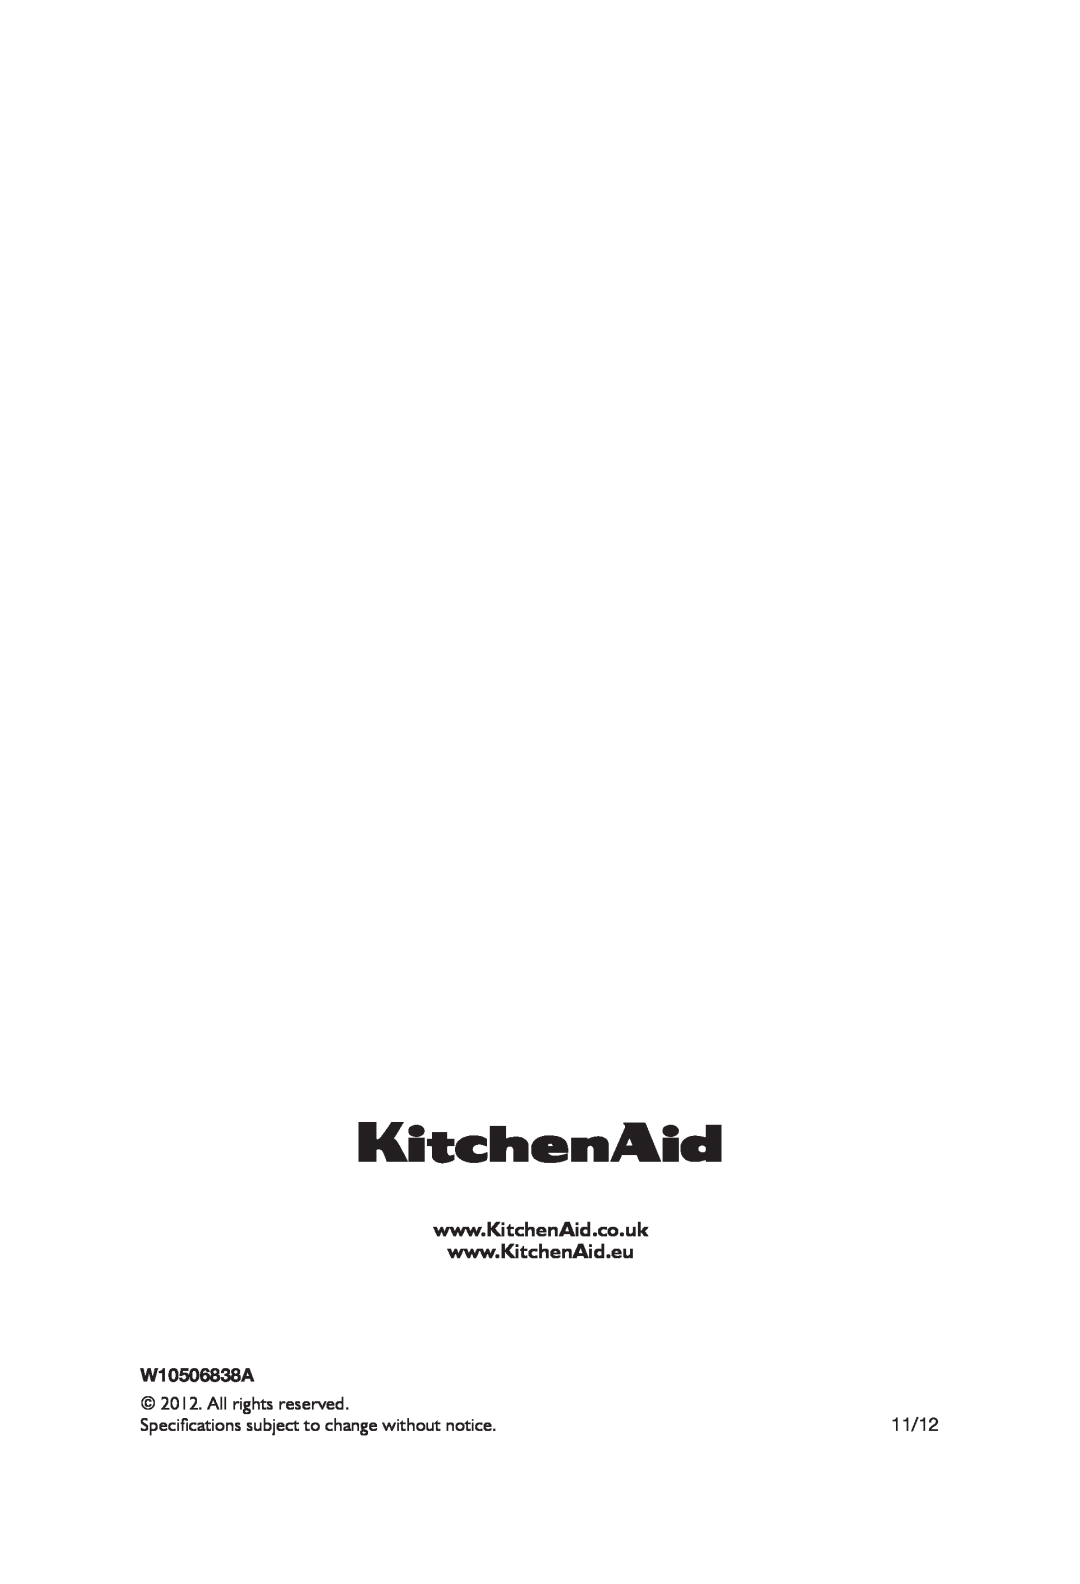 KitchenAid 5KMT2204, 5KMT4205 manual W10506838A, All rights reserved, Specifications subject to change without notice, 11/12 